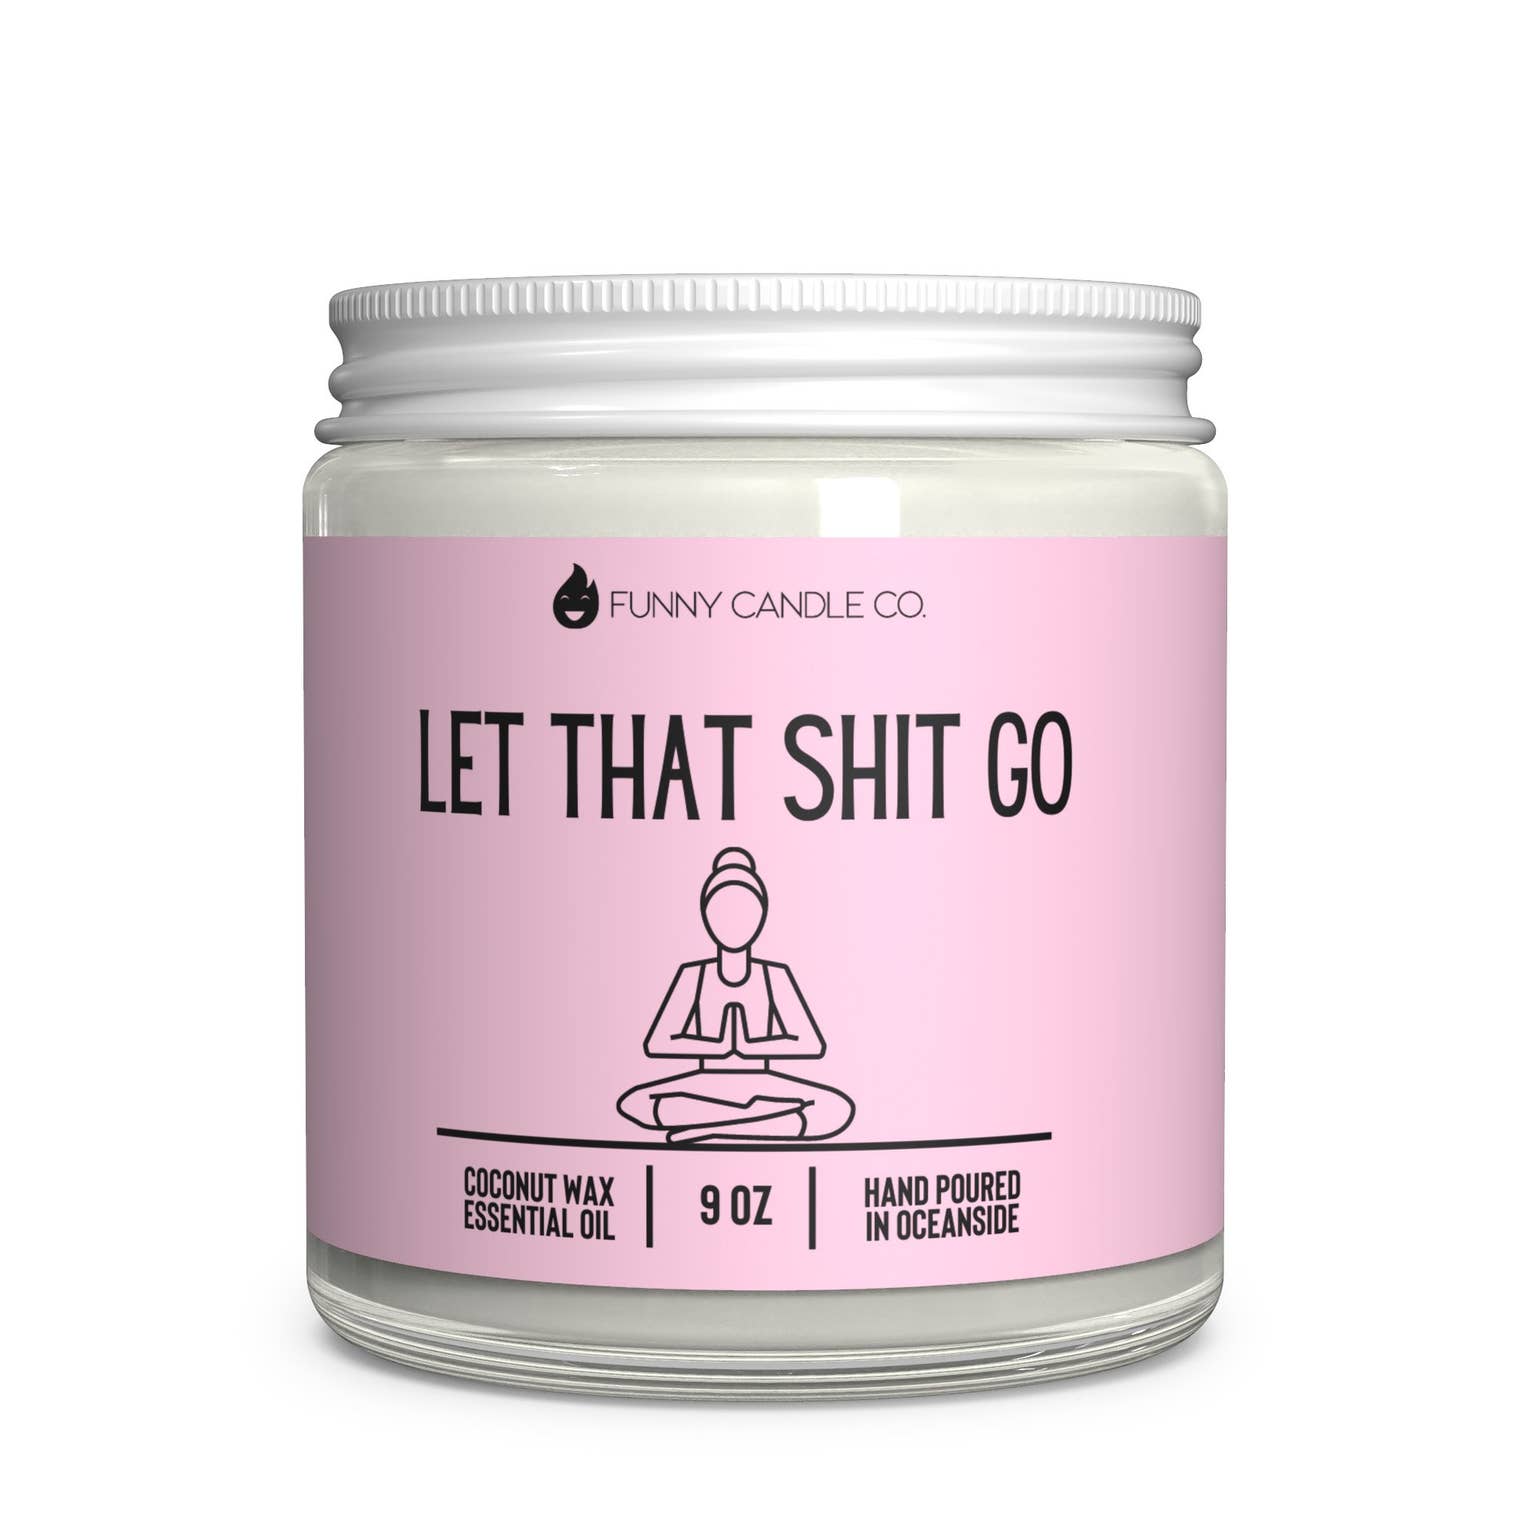 Let That Sh*t Go Candle (Pink) Candle